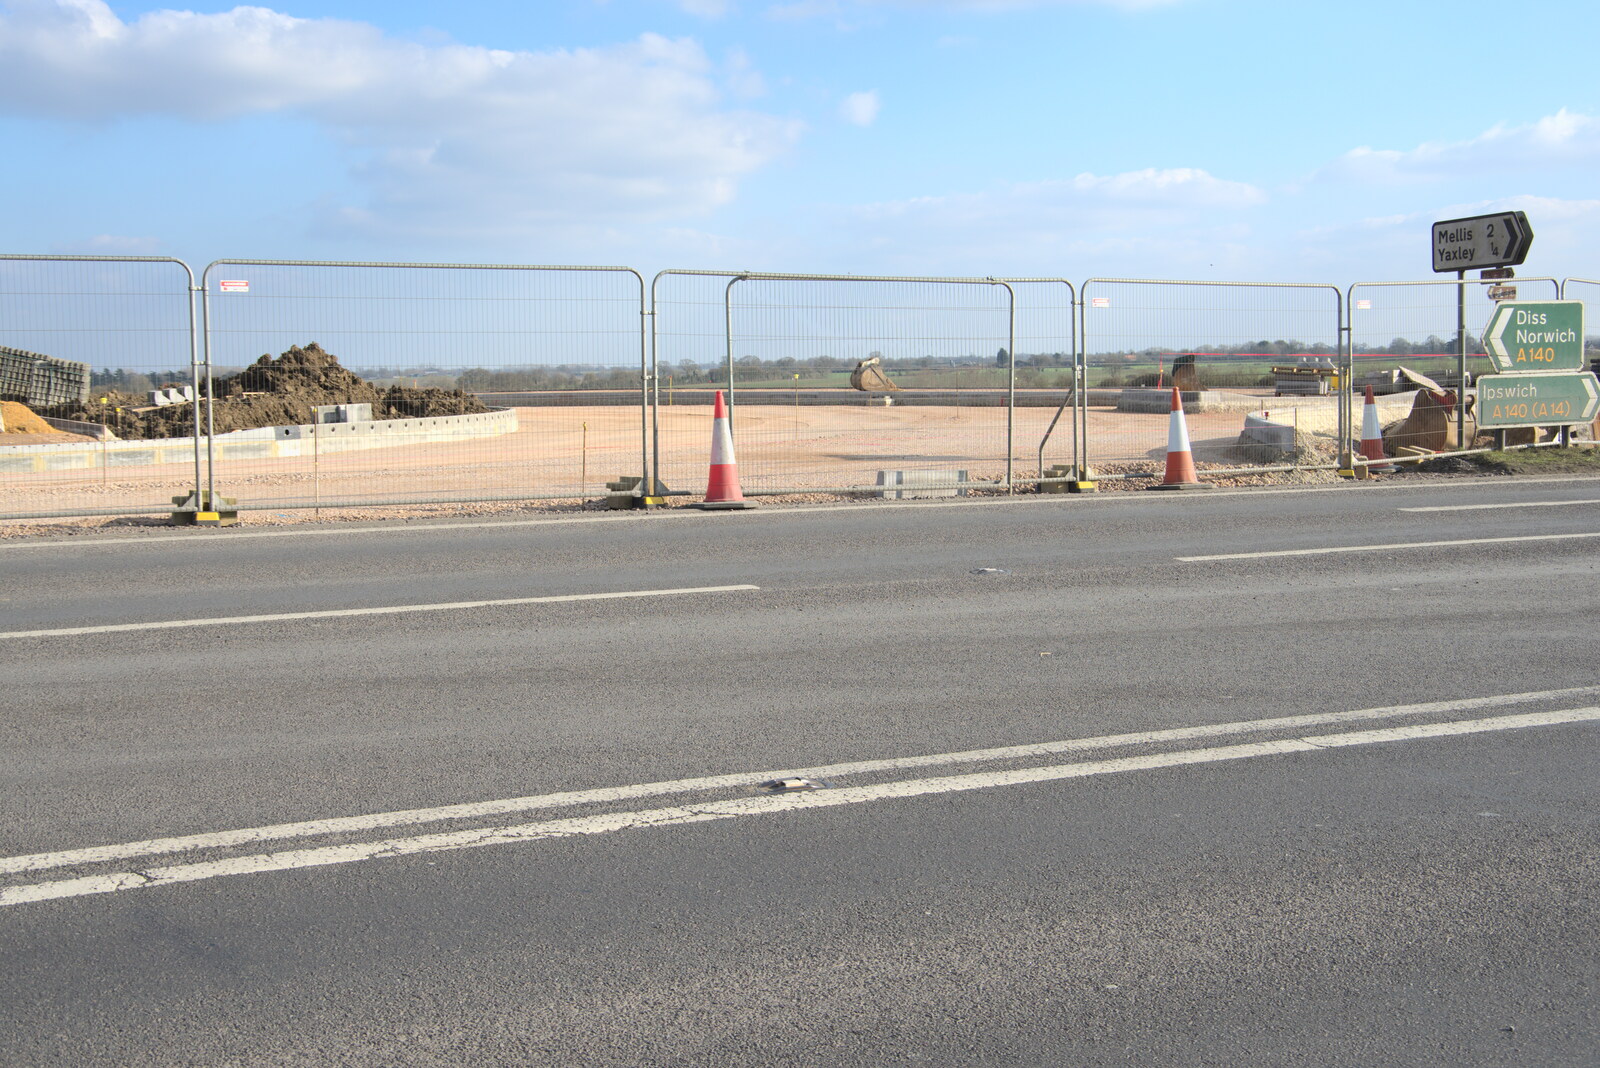 The other roundabout is not yet ready to go from Fred's New Bike and an A140 Closure, Brome, Suffolk - 27th February 2021